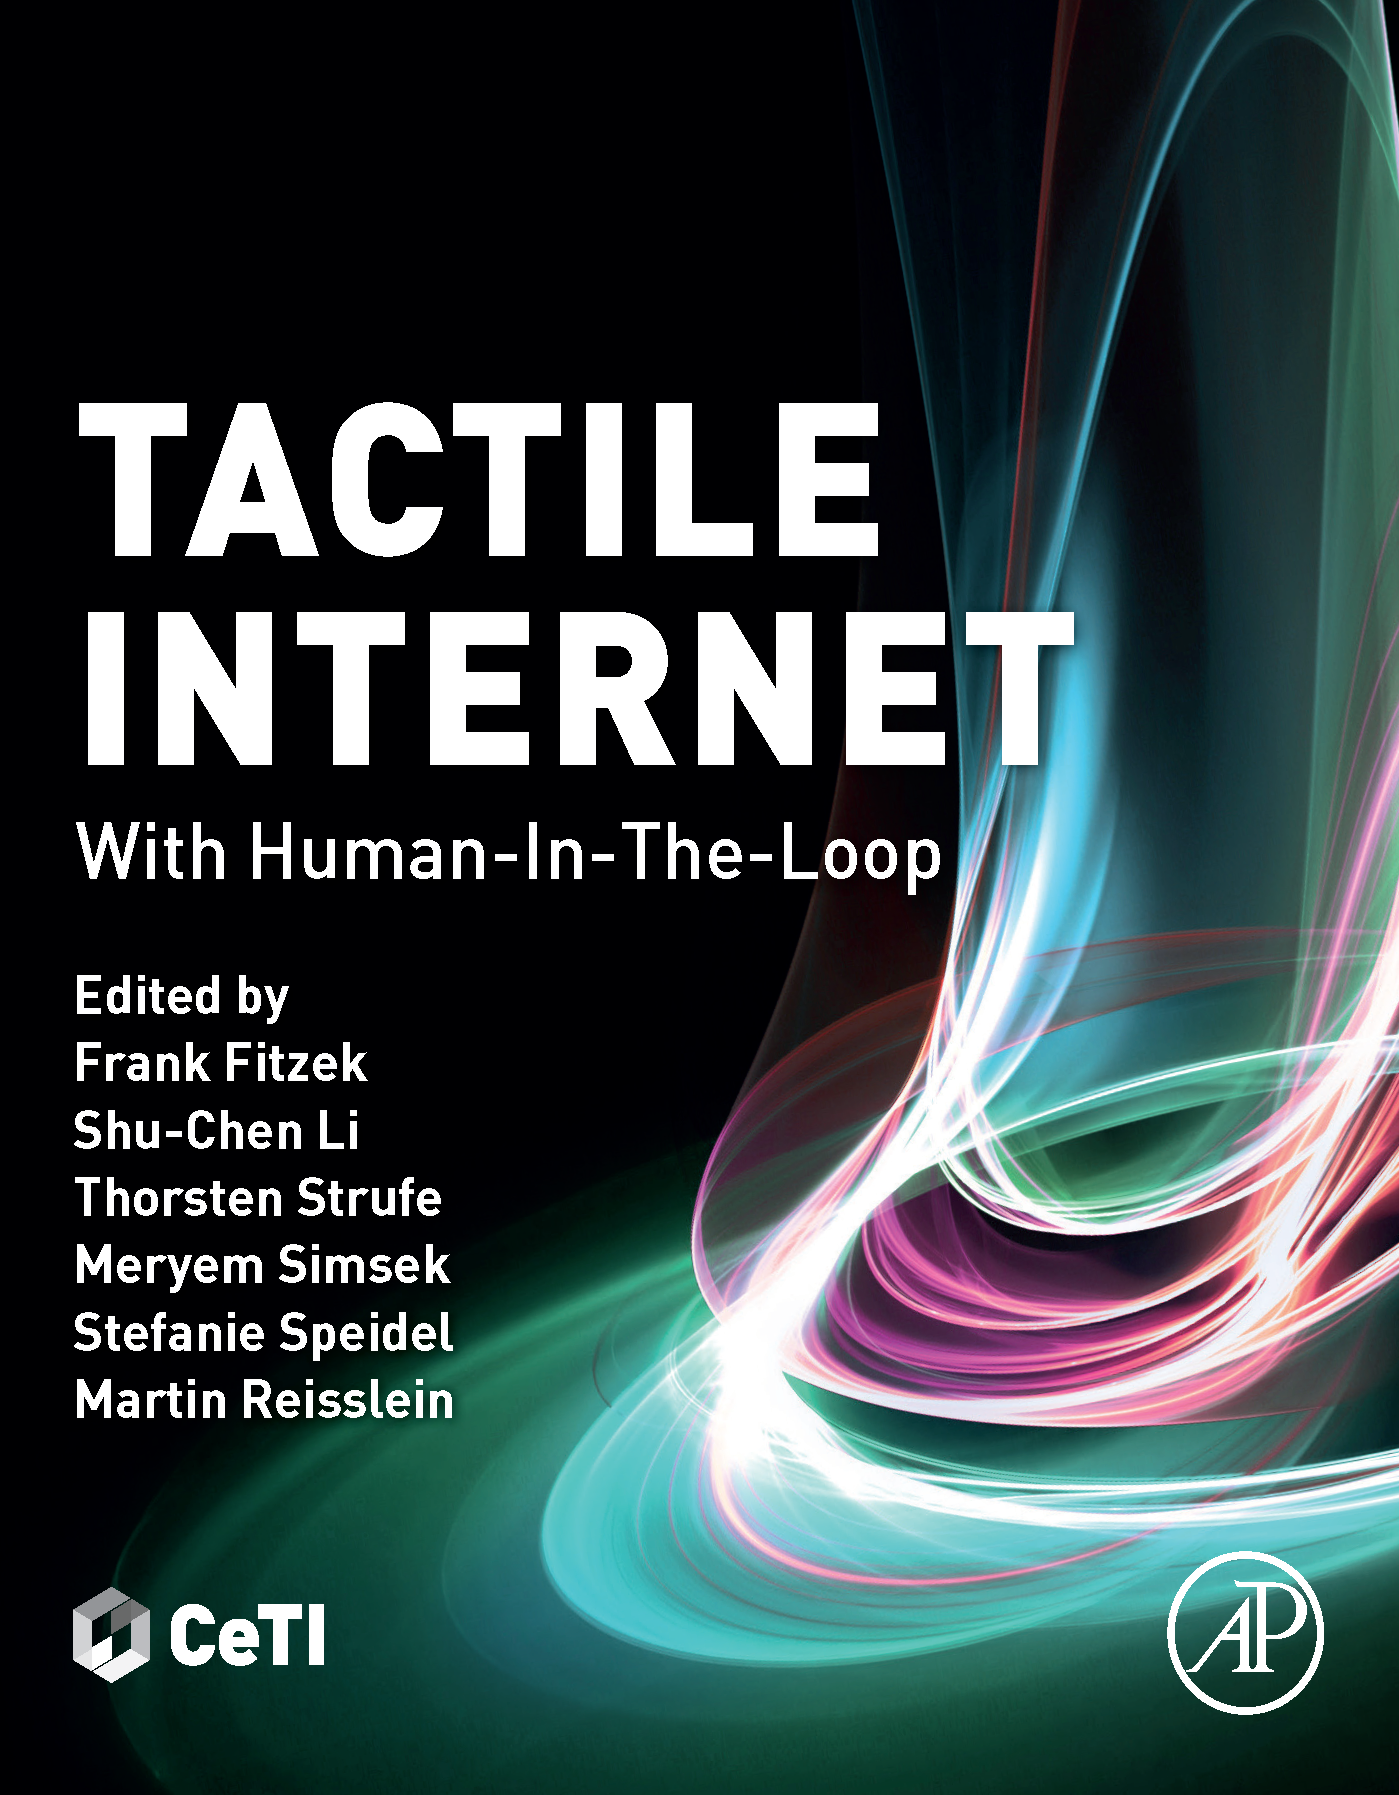 Cover of the CeTI book: Tactile Internet with Human-In-The-Loop